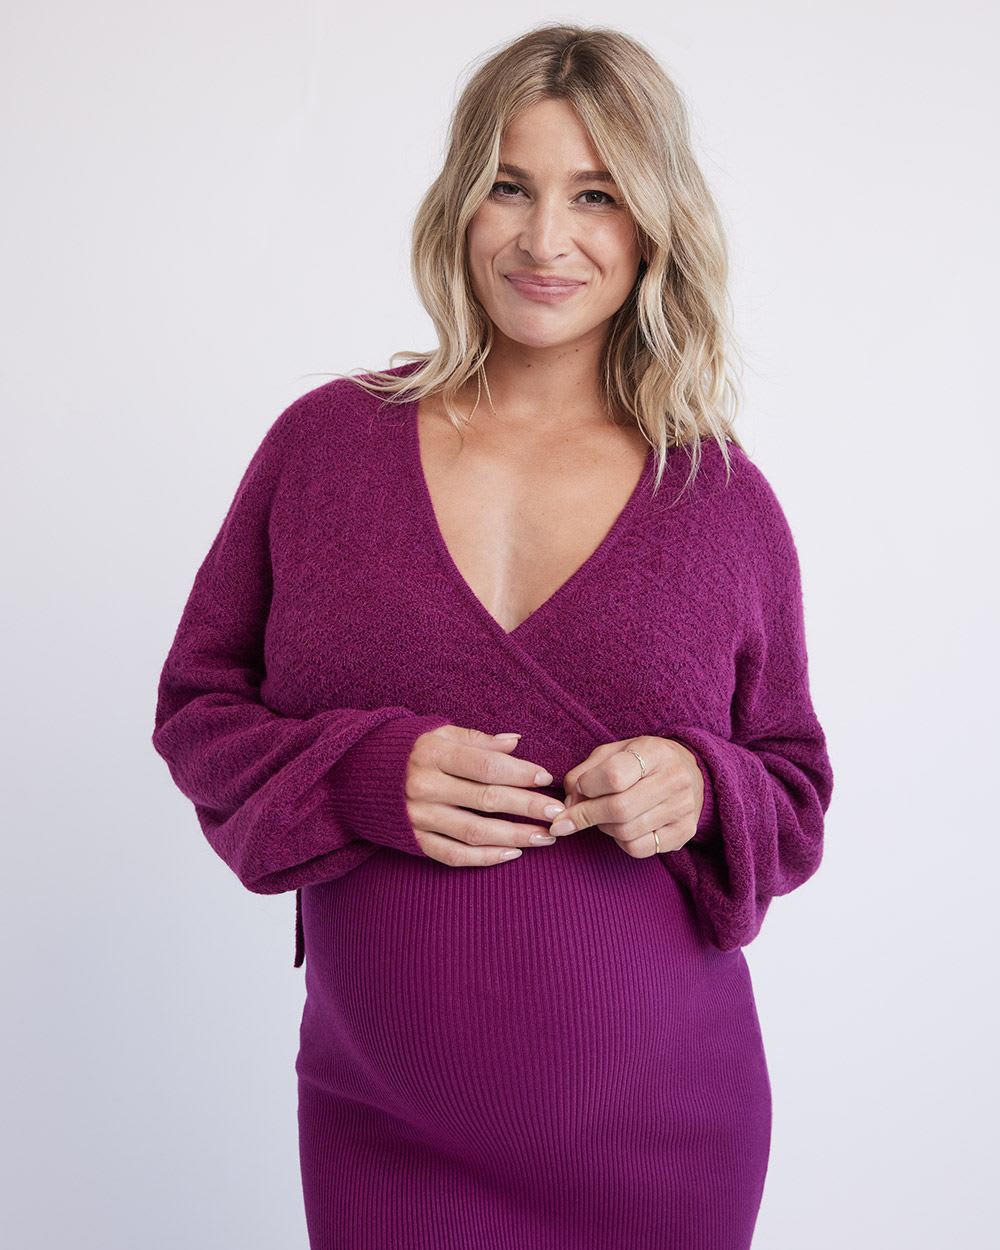 Ribbed Bodycon Dress and Cardigan - Thyme Maternity